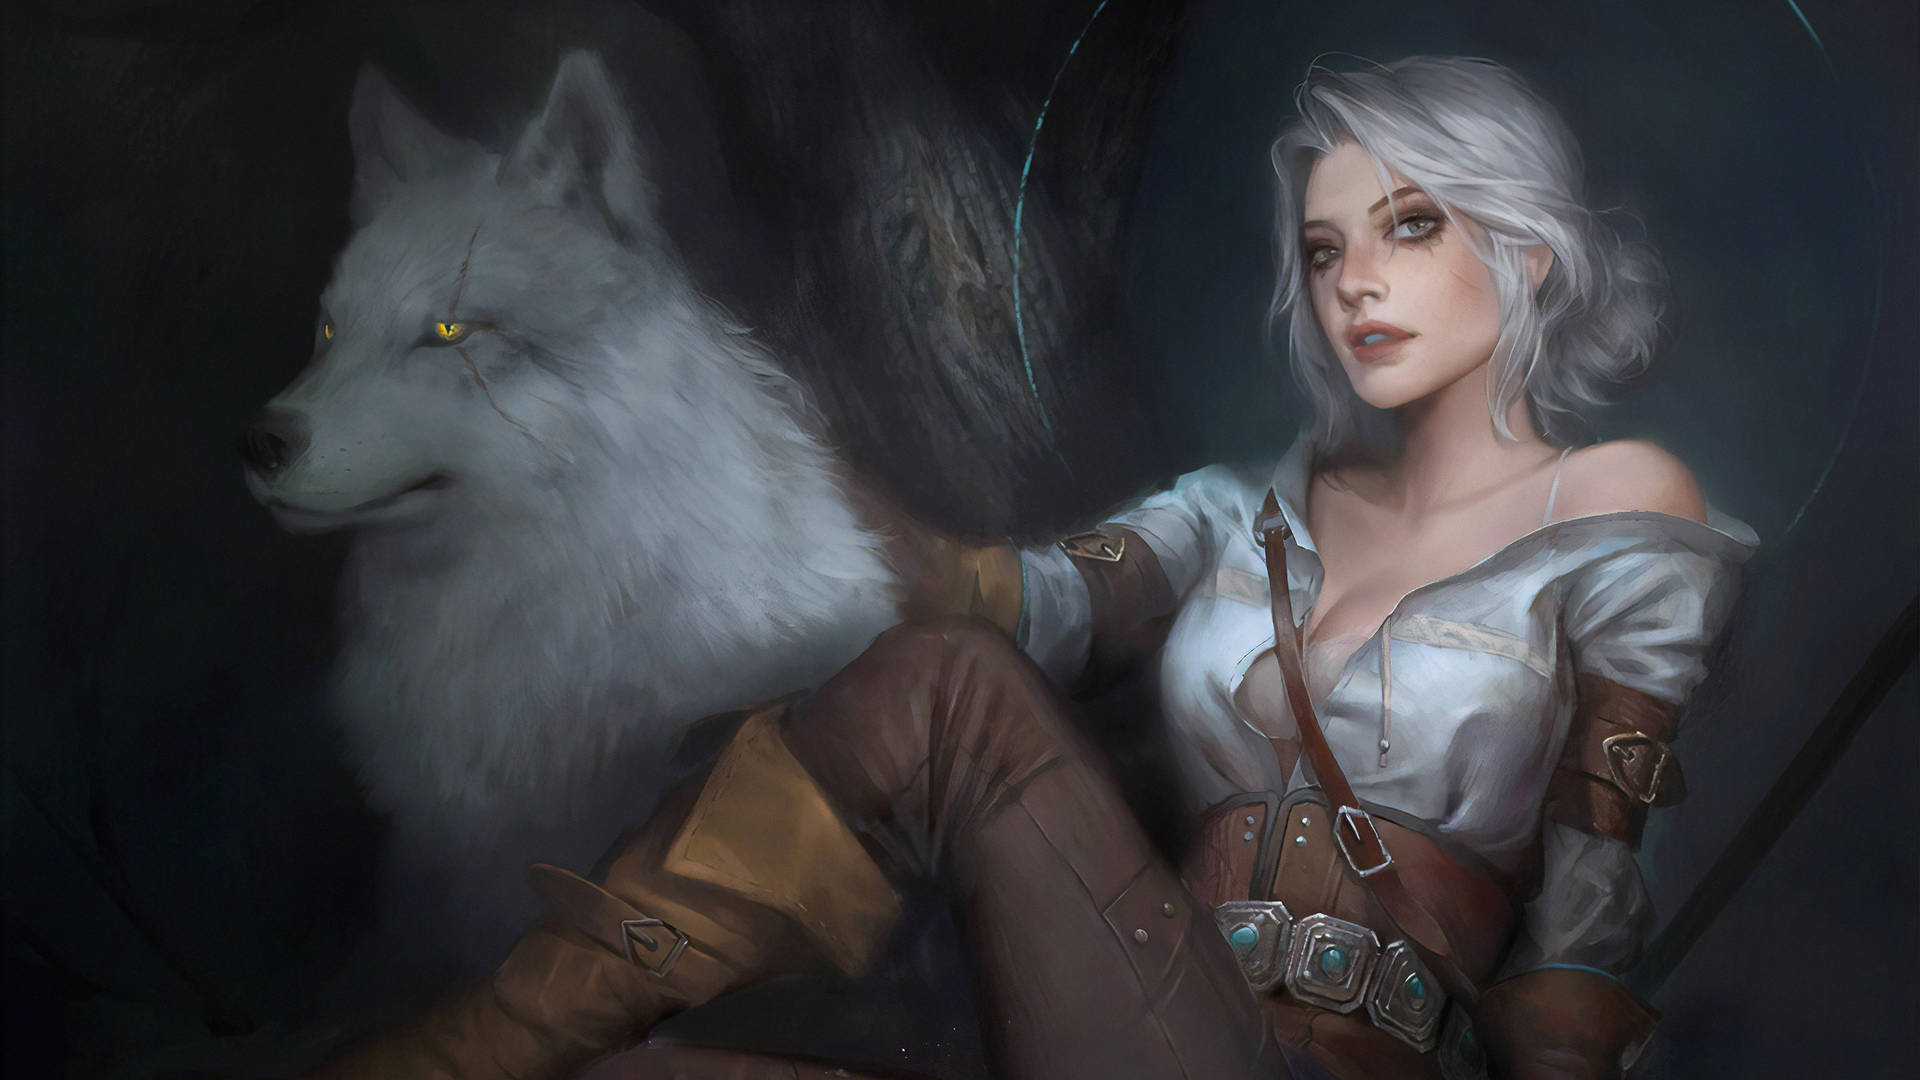 Ciri in the “Witcher 3” Wallpaper